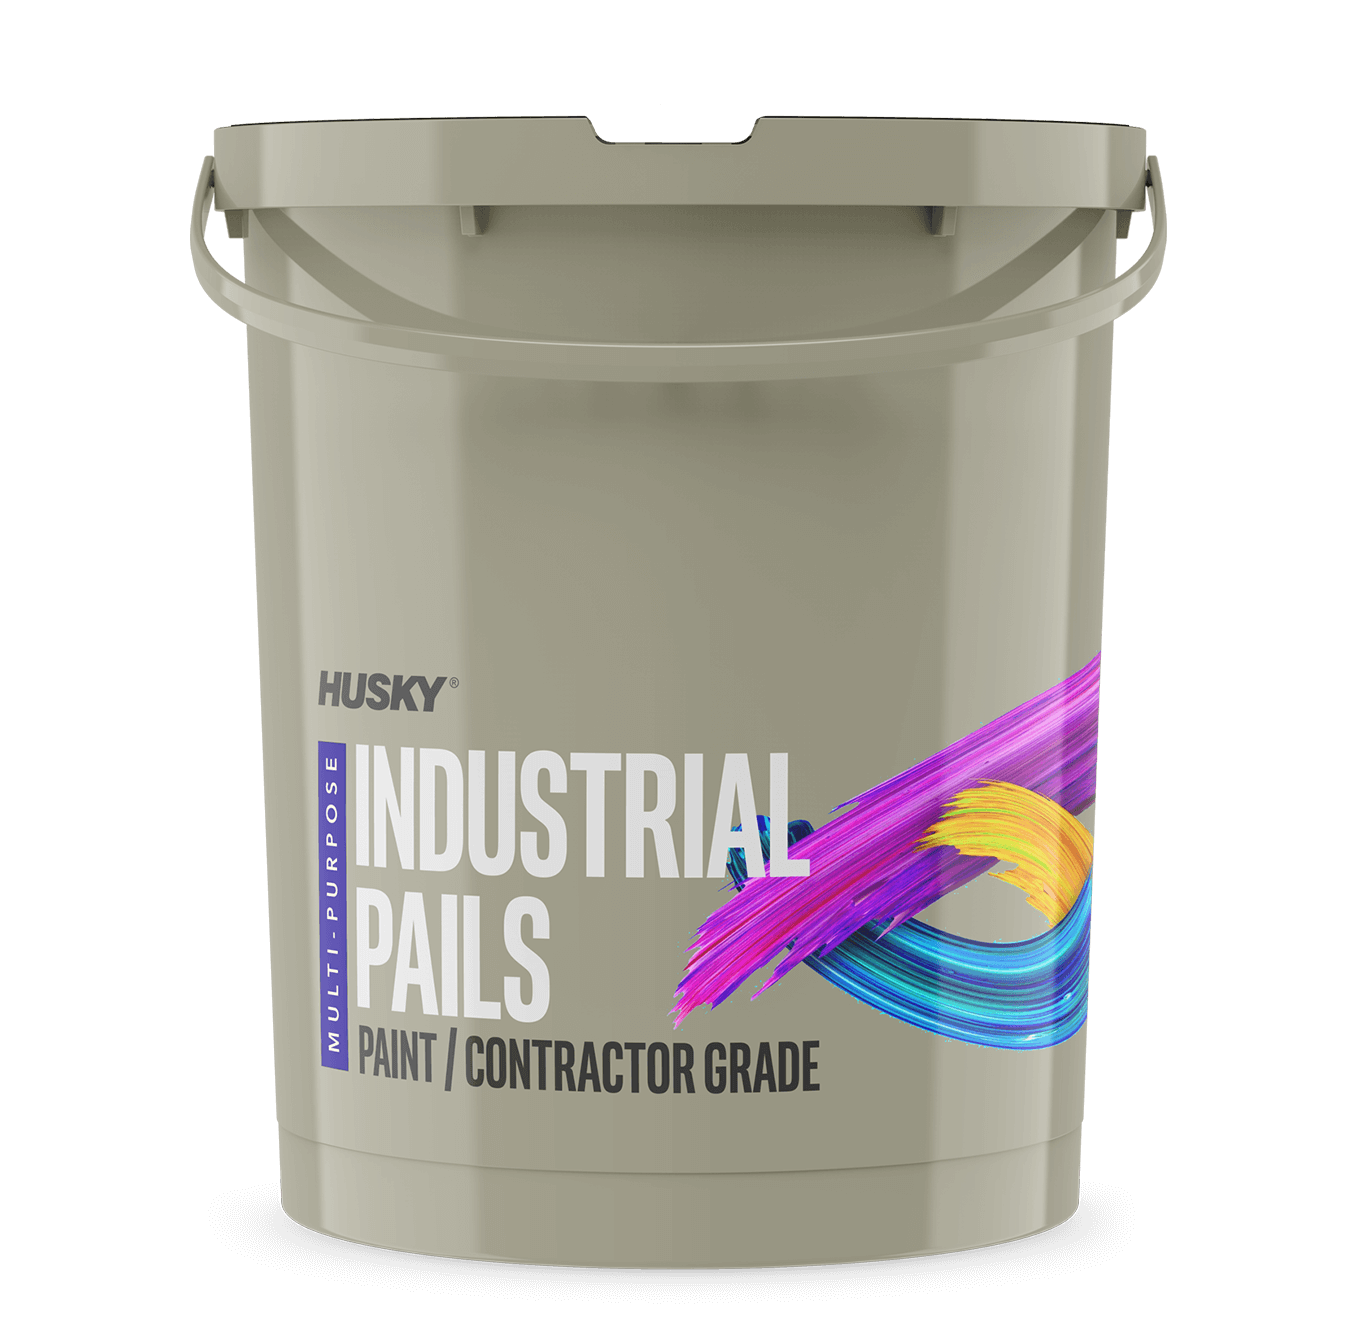 An industrial pail for paint manufactured with Husky mold injection technology.